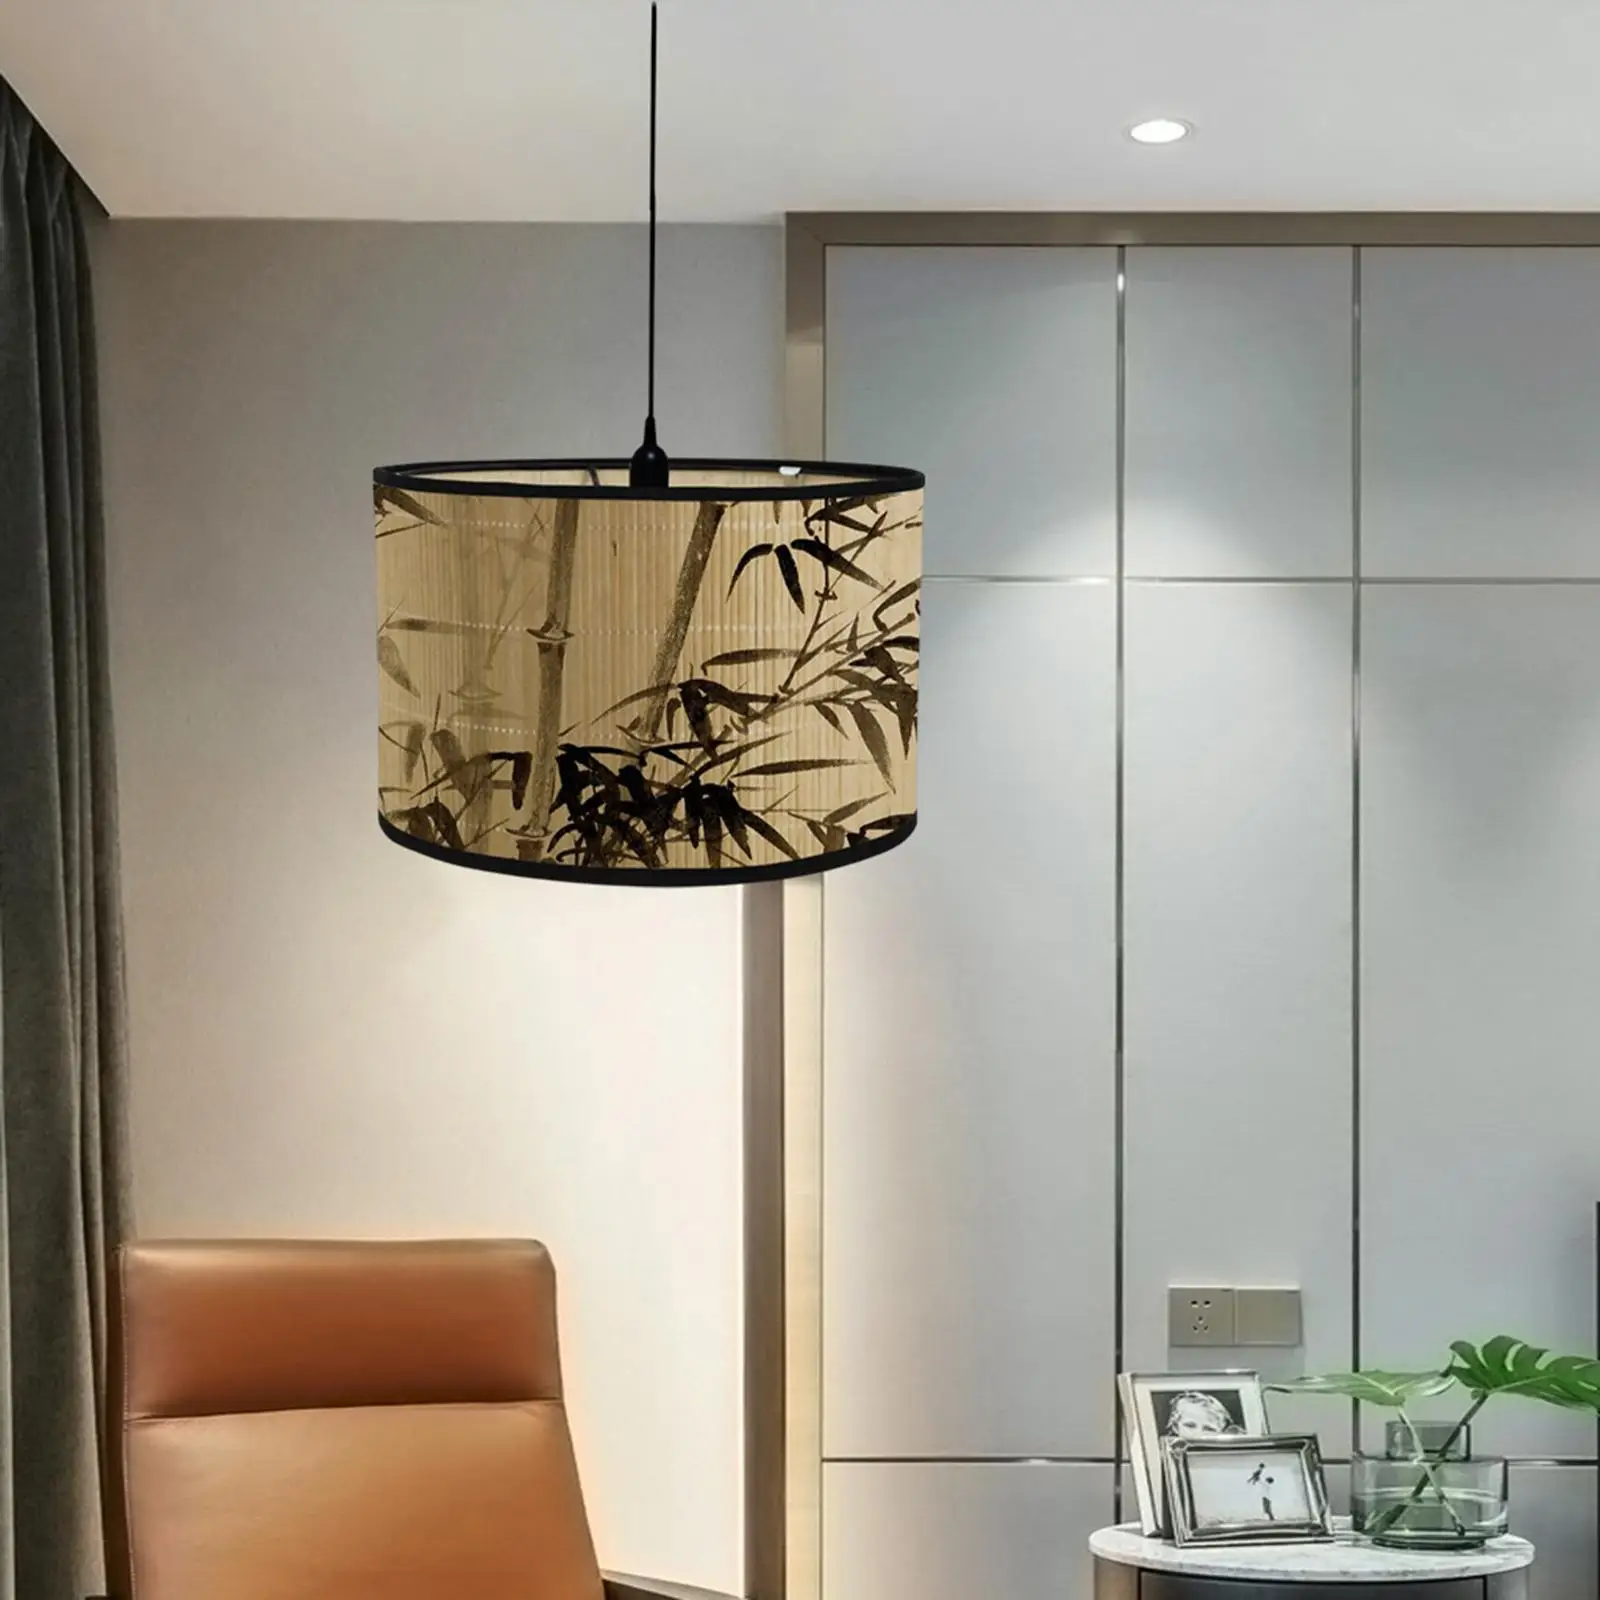 Rustic Bamboo Lamp Shade Ceiling Light Fixture Hanging Pendant Light Cover Minimalistic for Living Room Nursery Kitchen Island